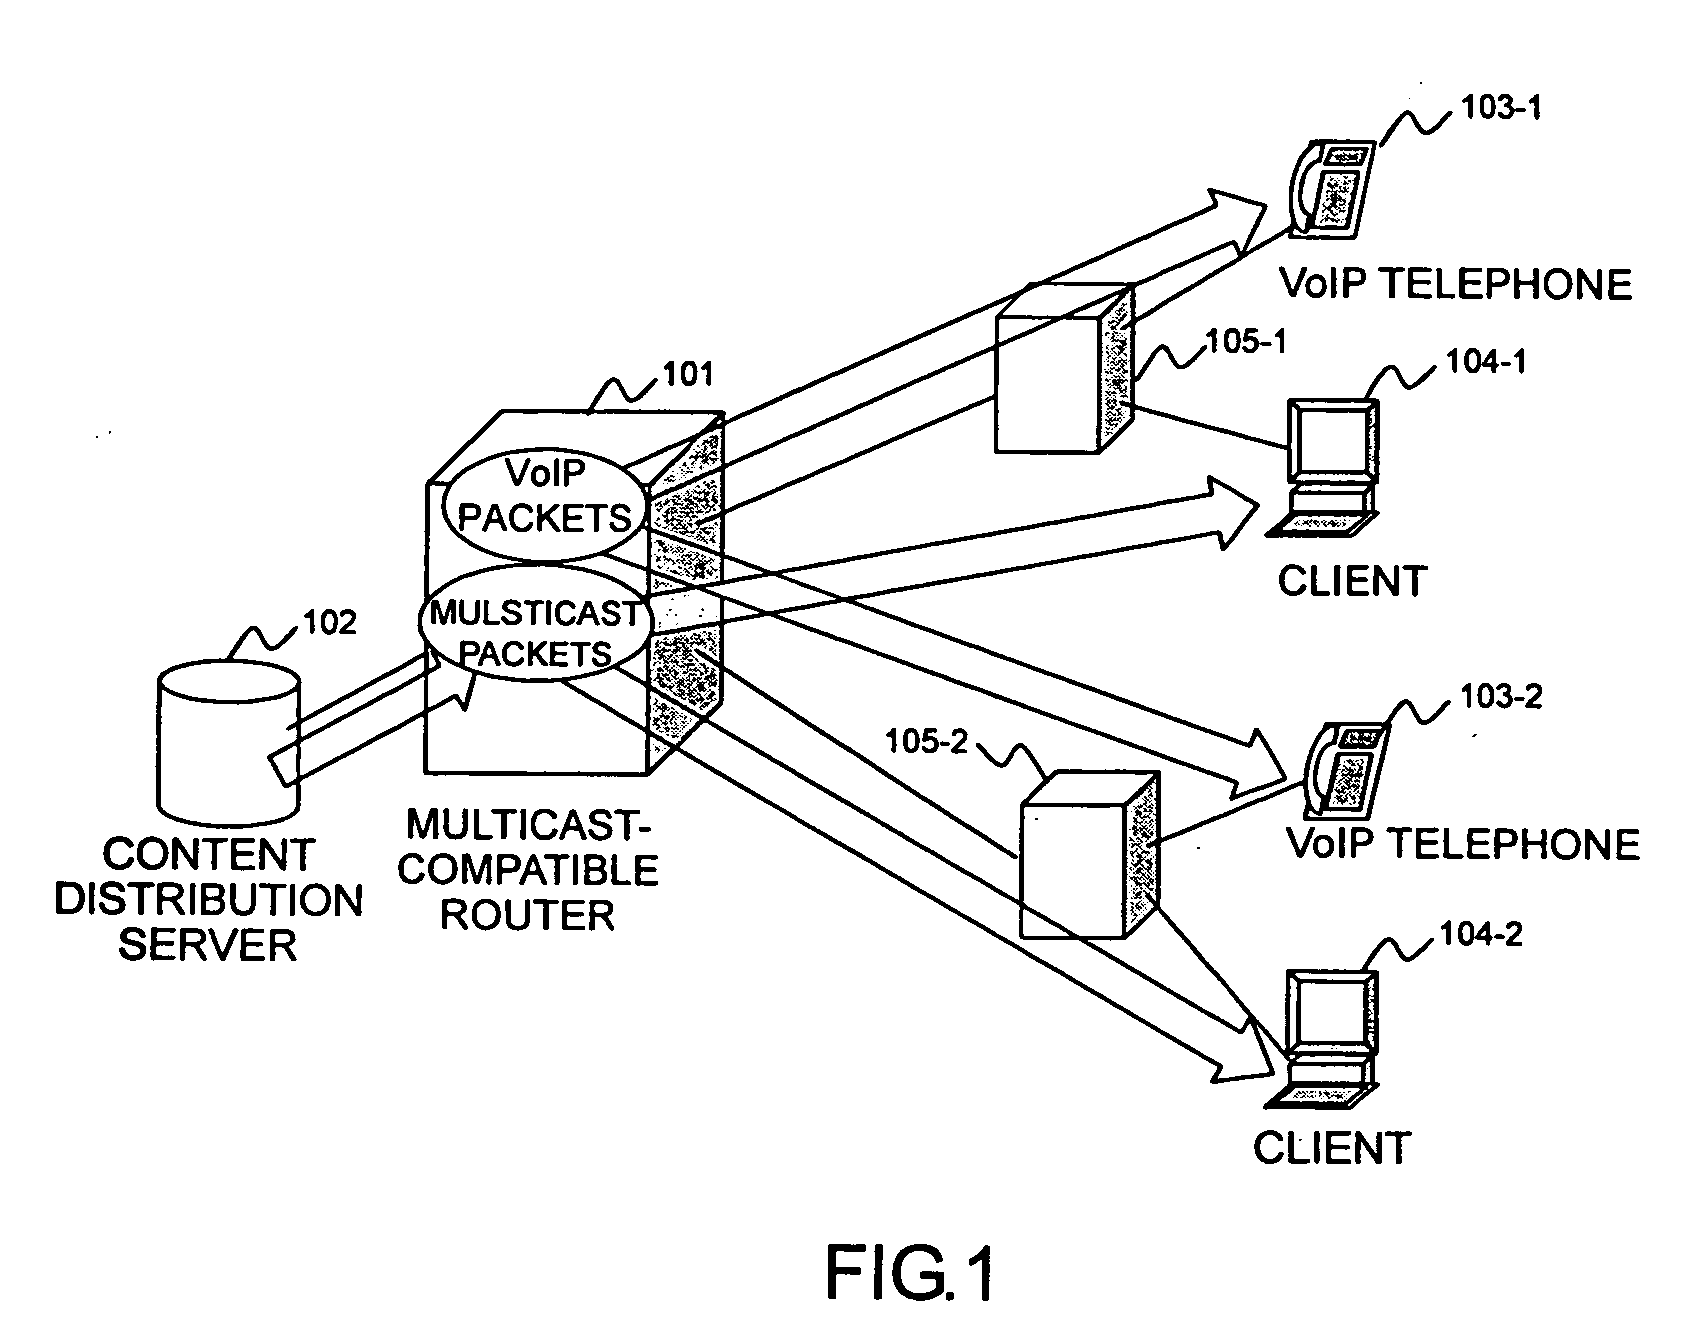 Packet forwarding apparatus and method for multicast packets